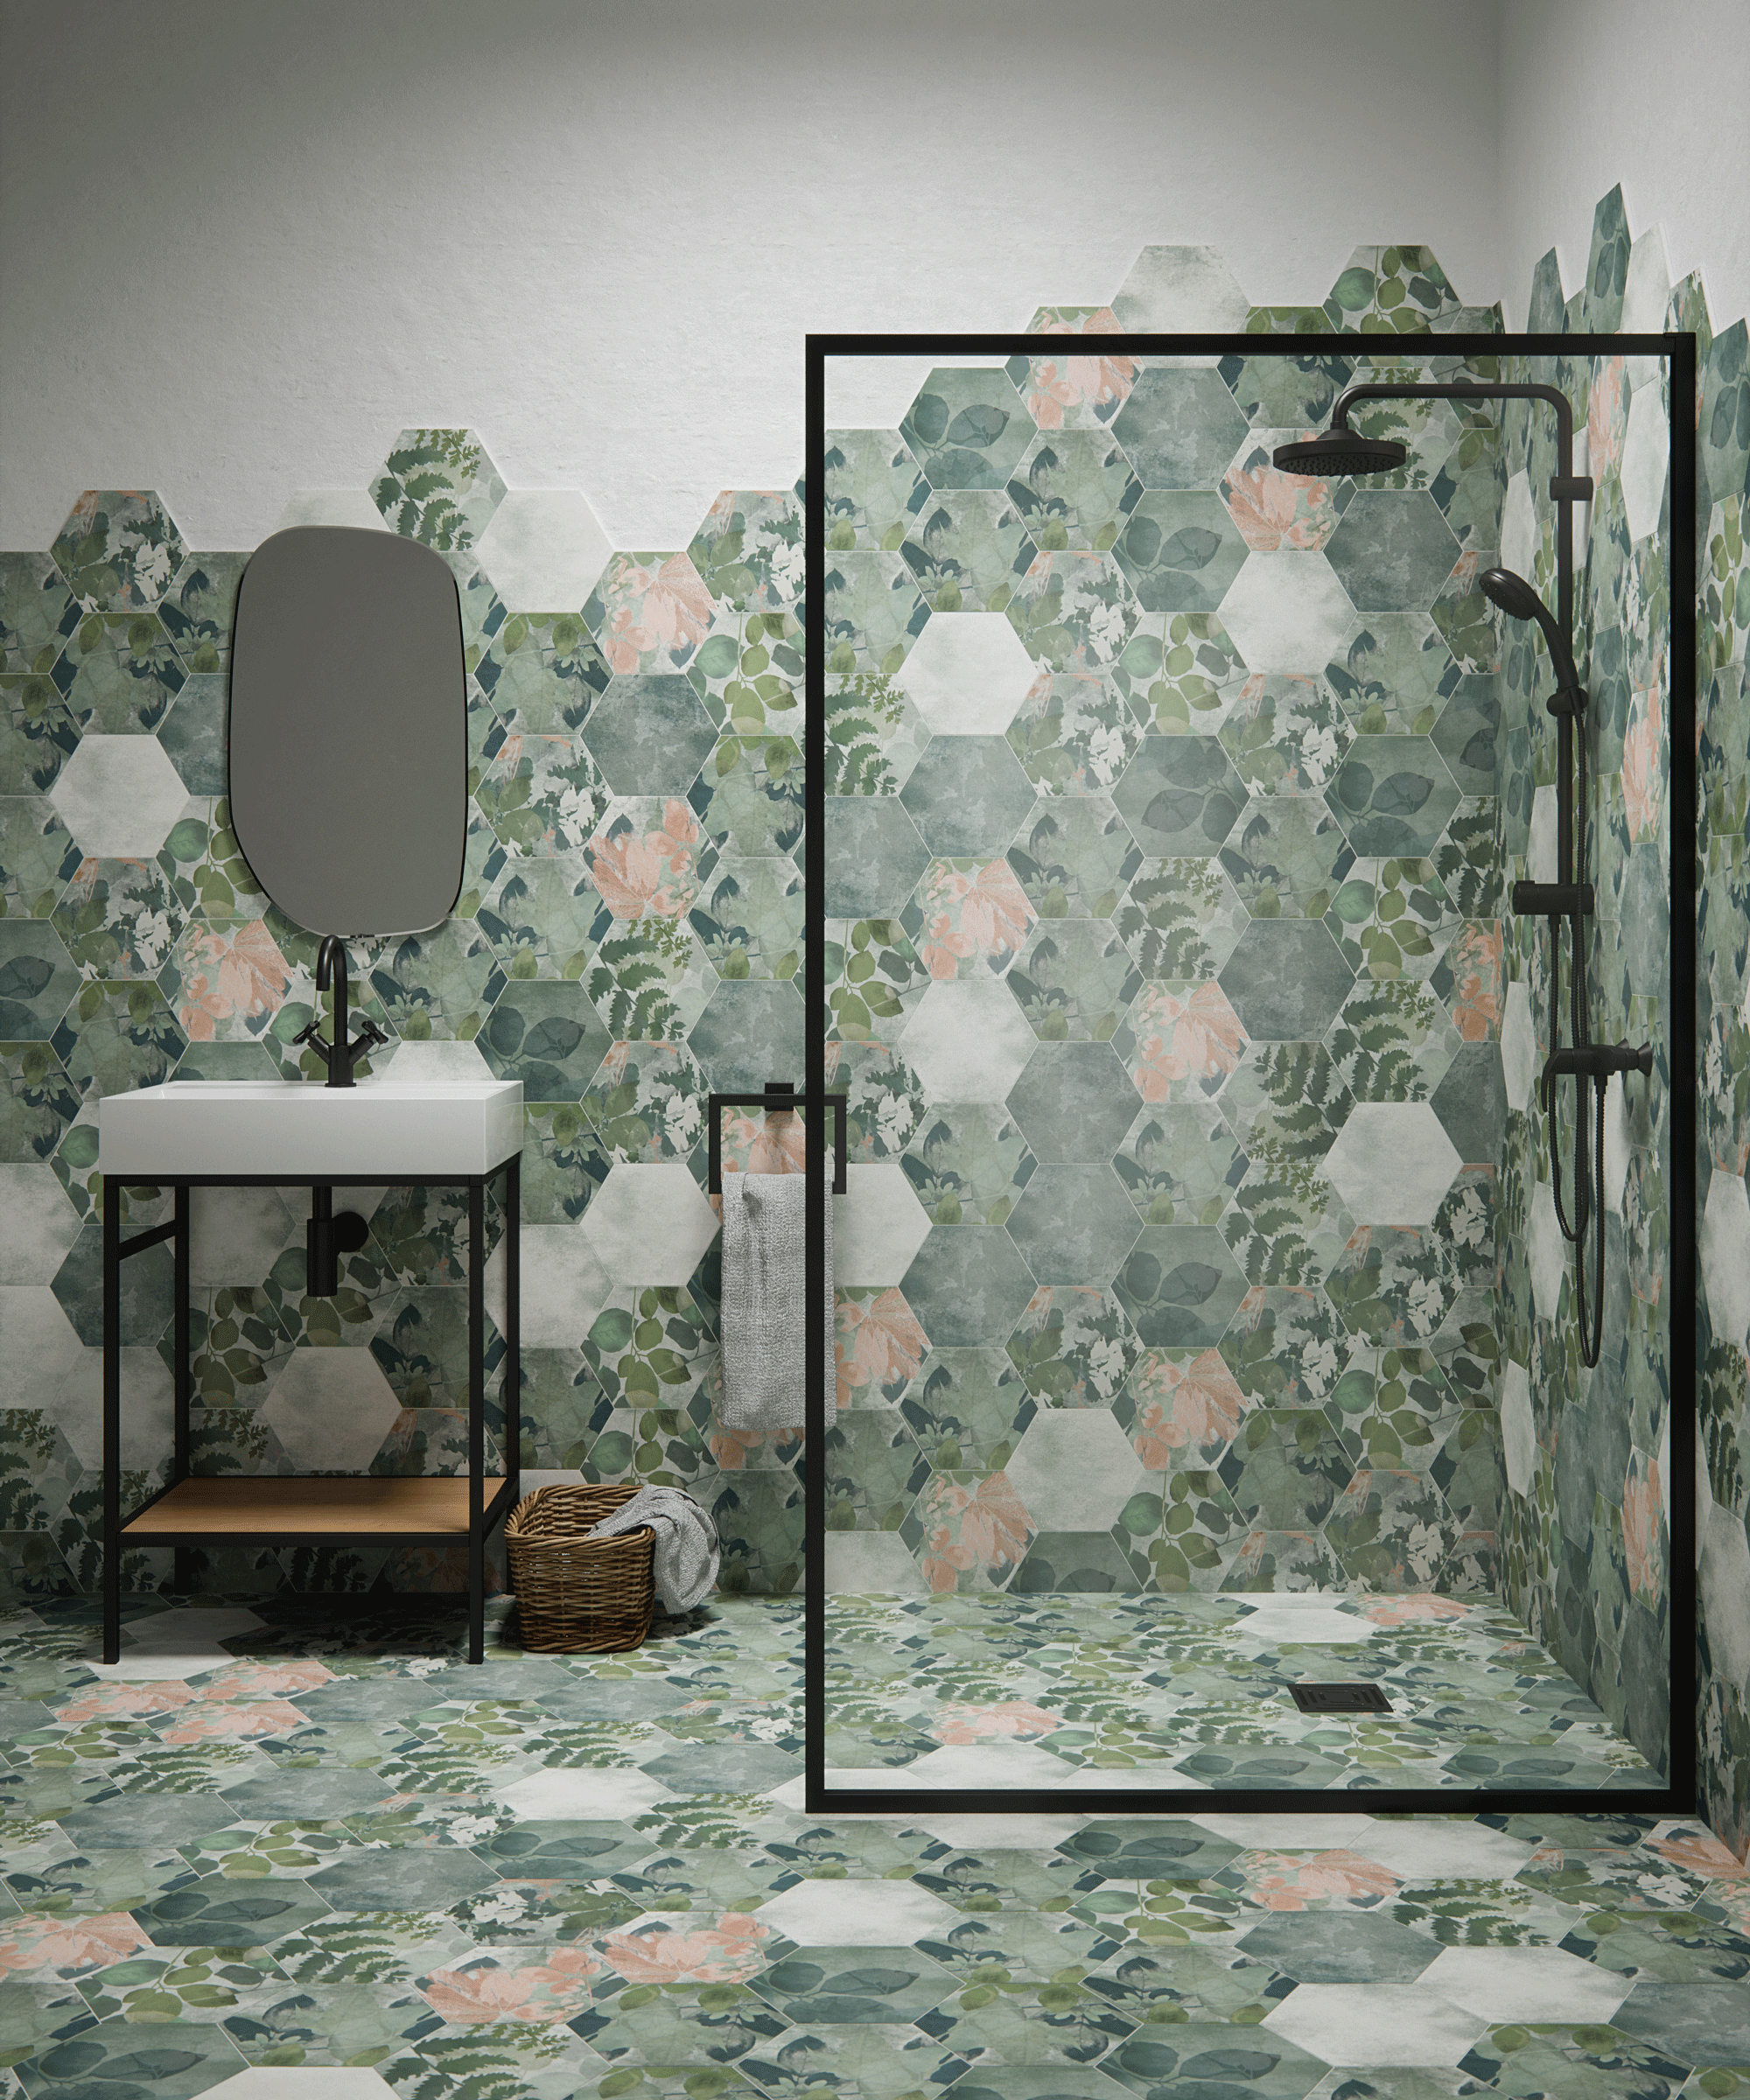 Shower wall and floor in floral hexagonal tile